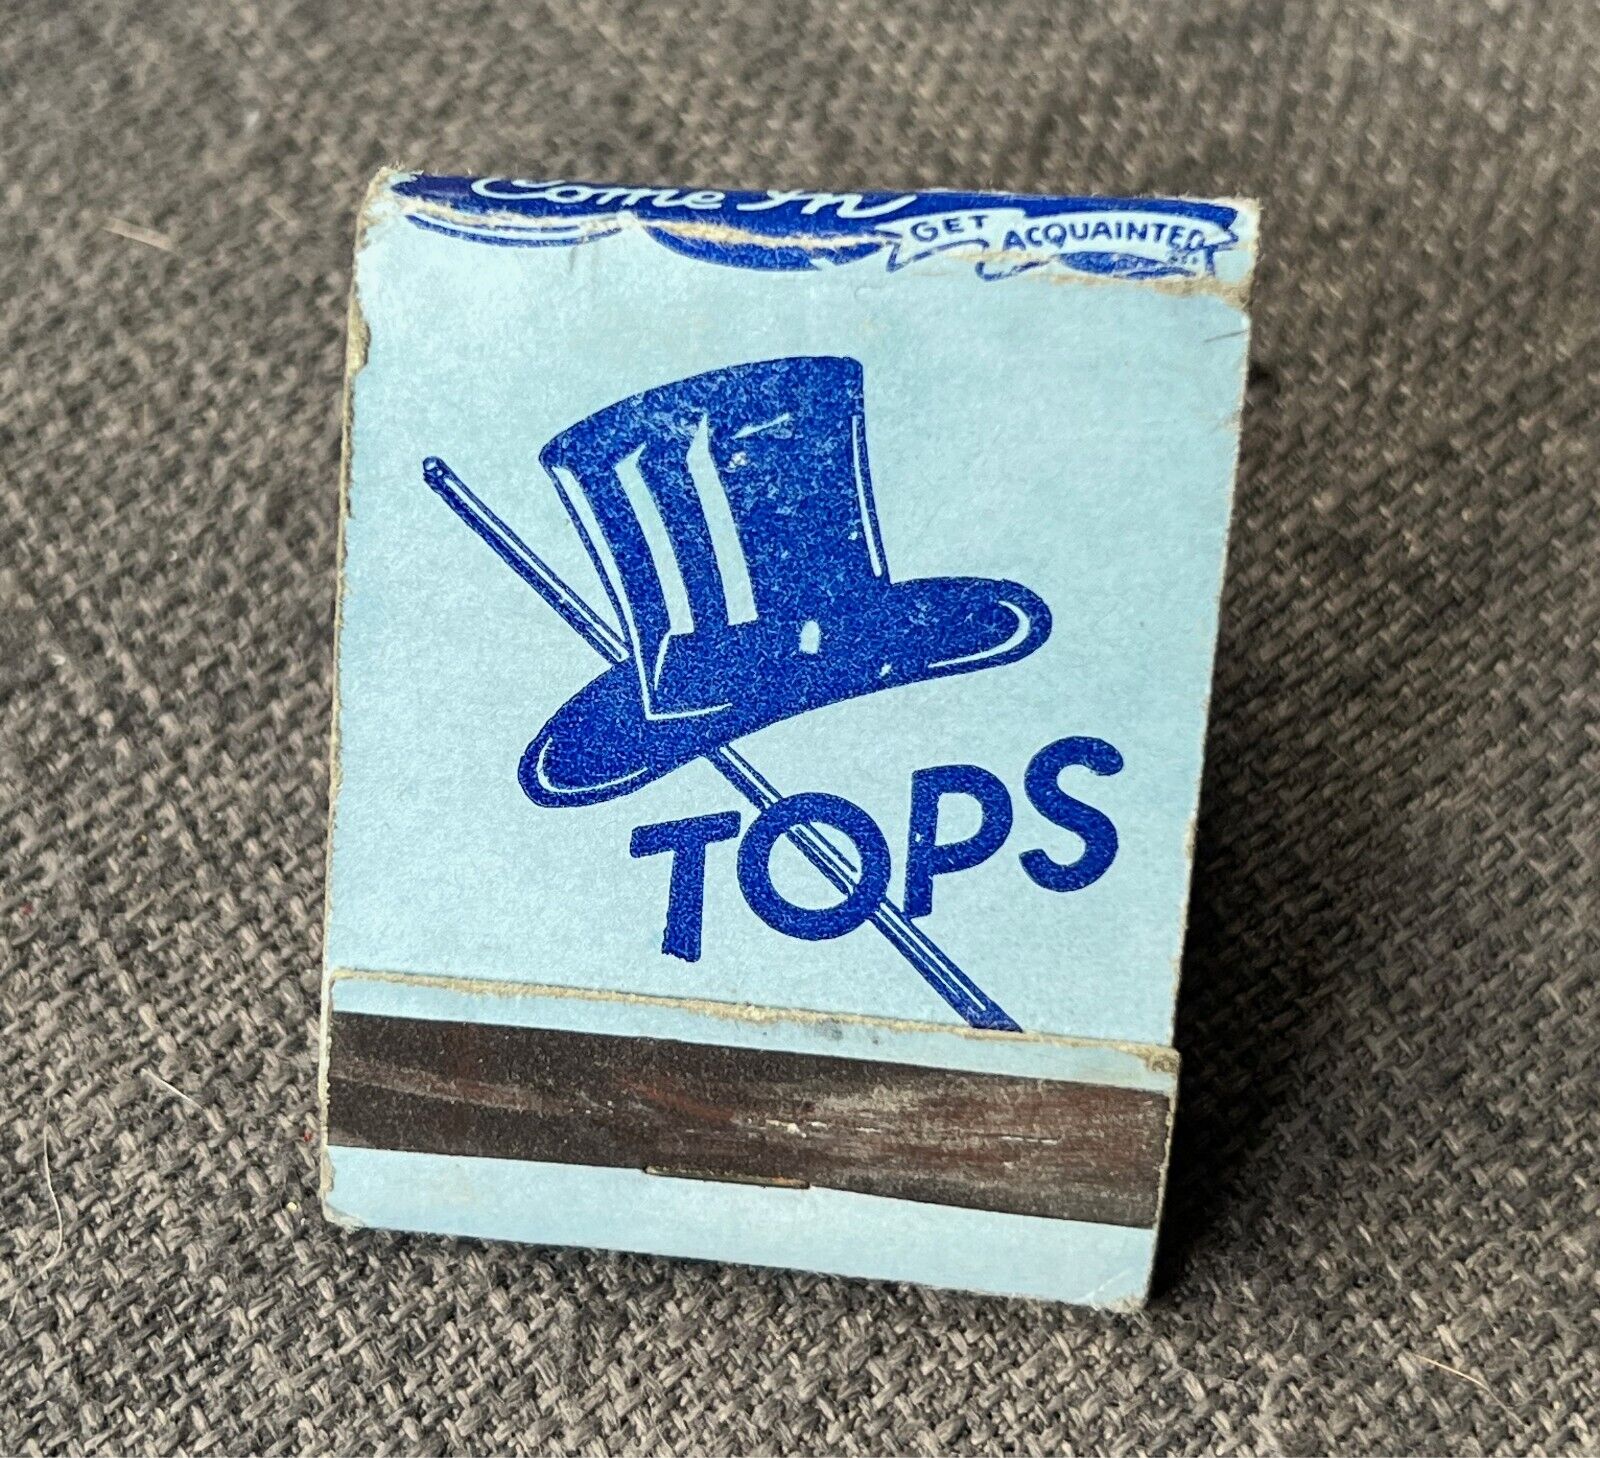 Vintage Douglas TOPS Hat - Come in Get Acquainted - Blue White Matchbook Matches